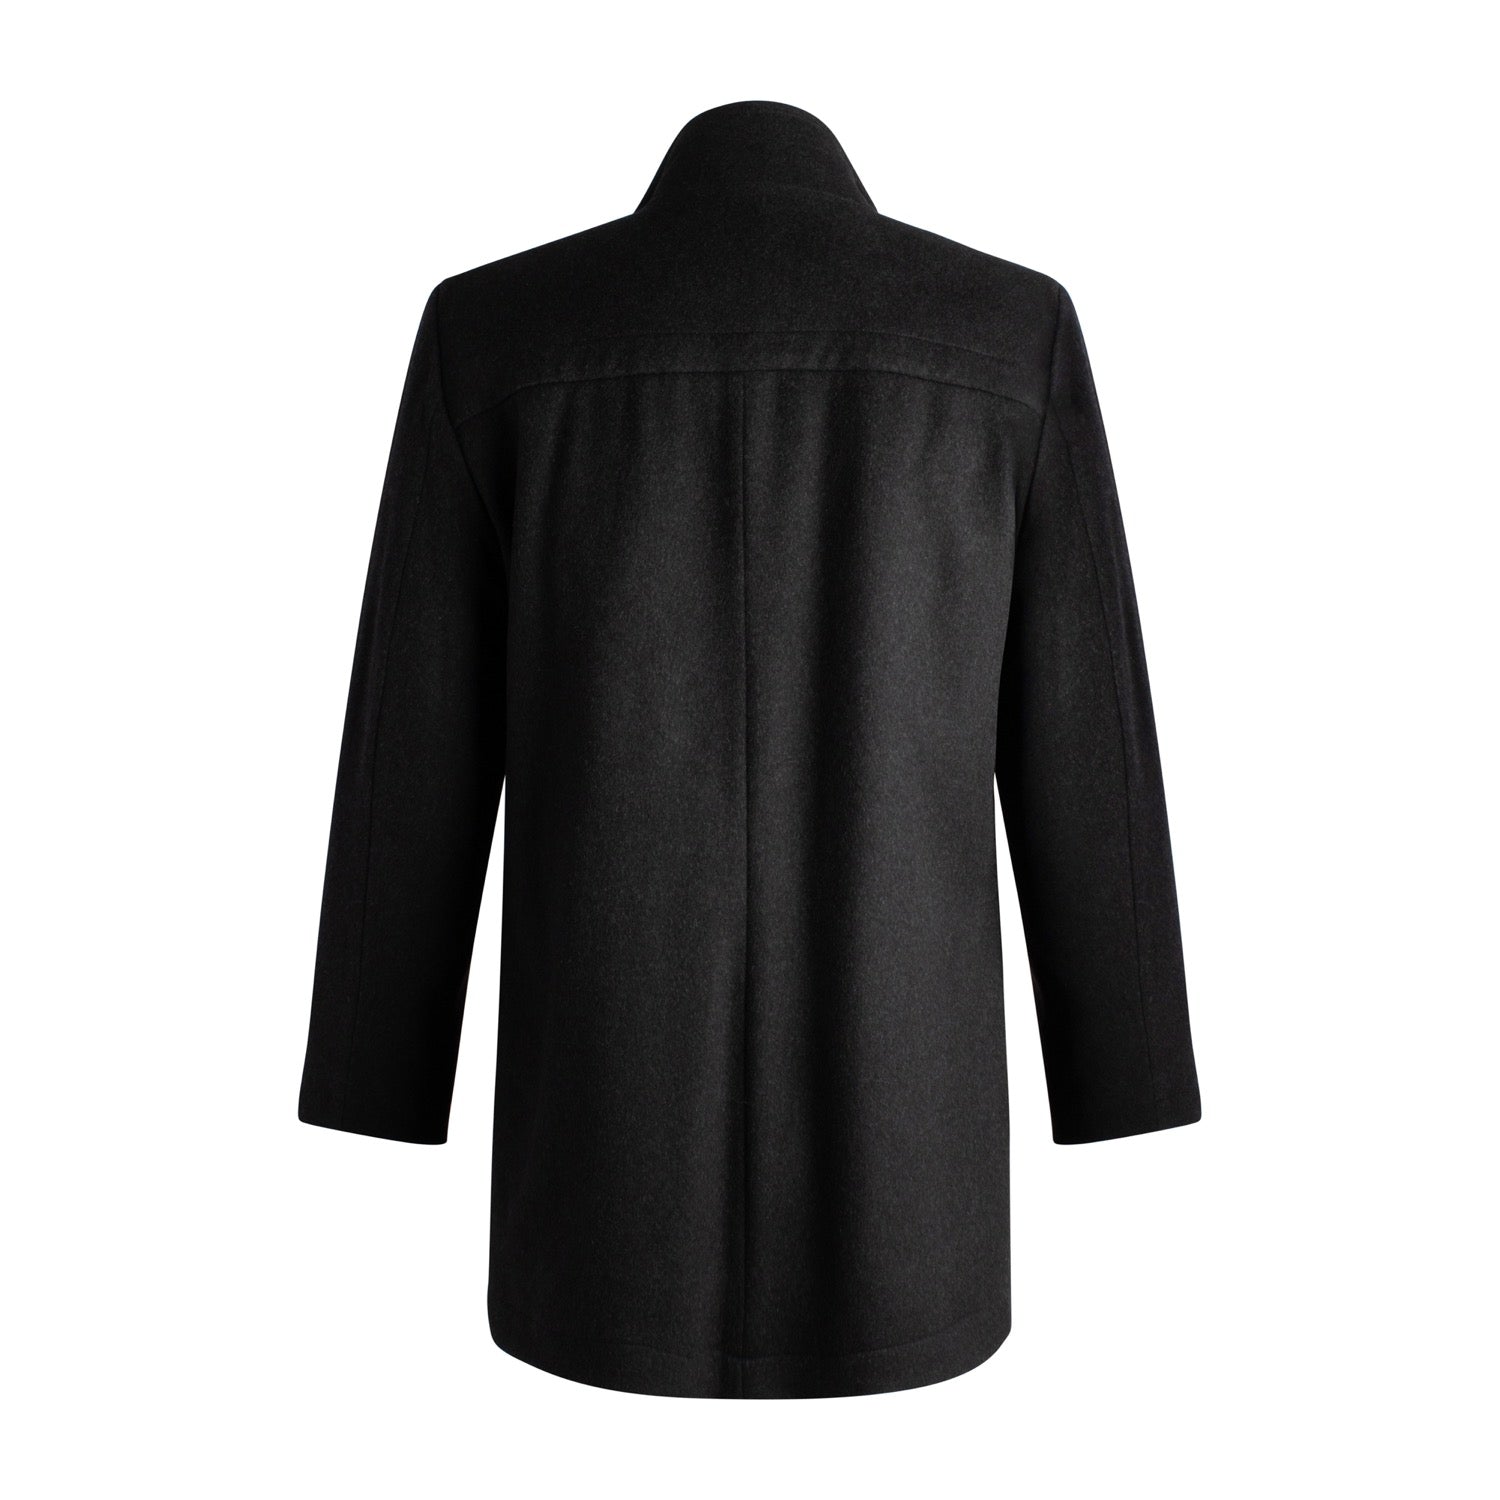 Cashmere Blend 6-Button Coat with Zip-Out Wind Blocker in Charcoal by Viyella